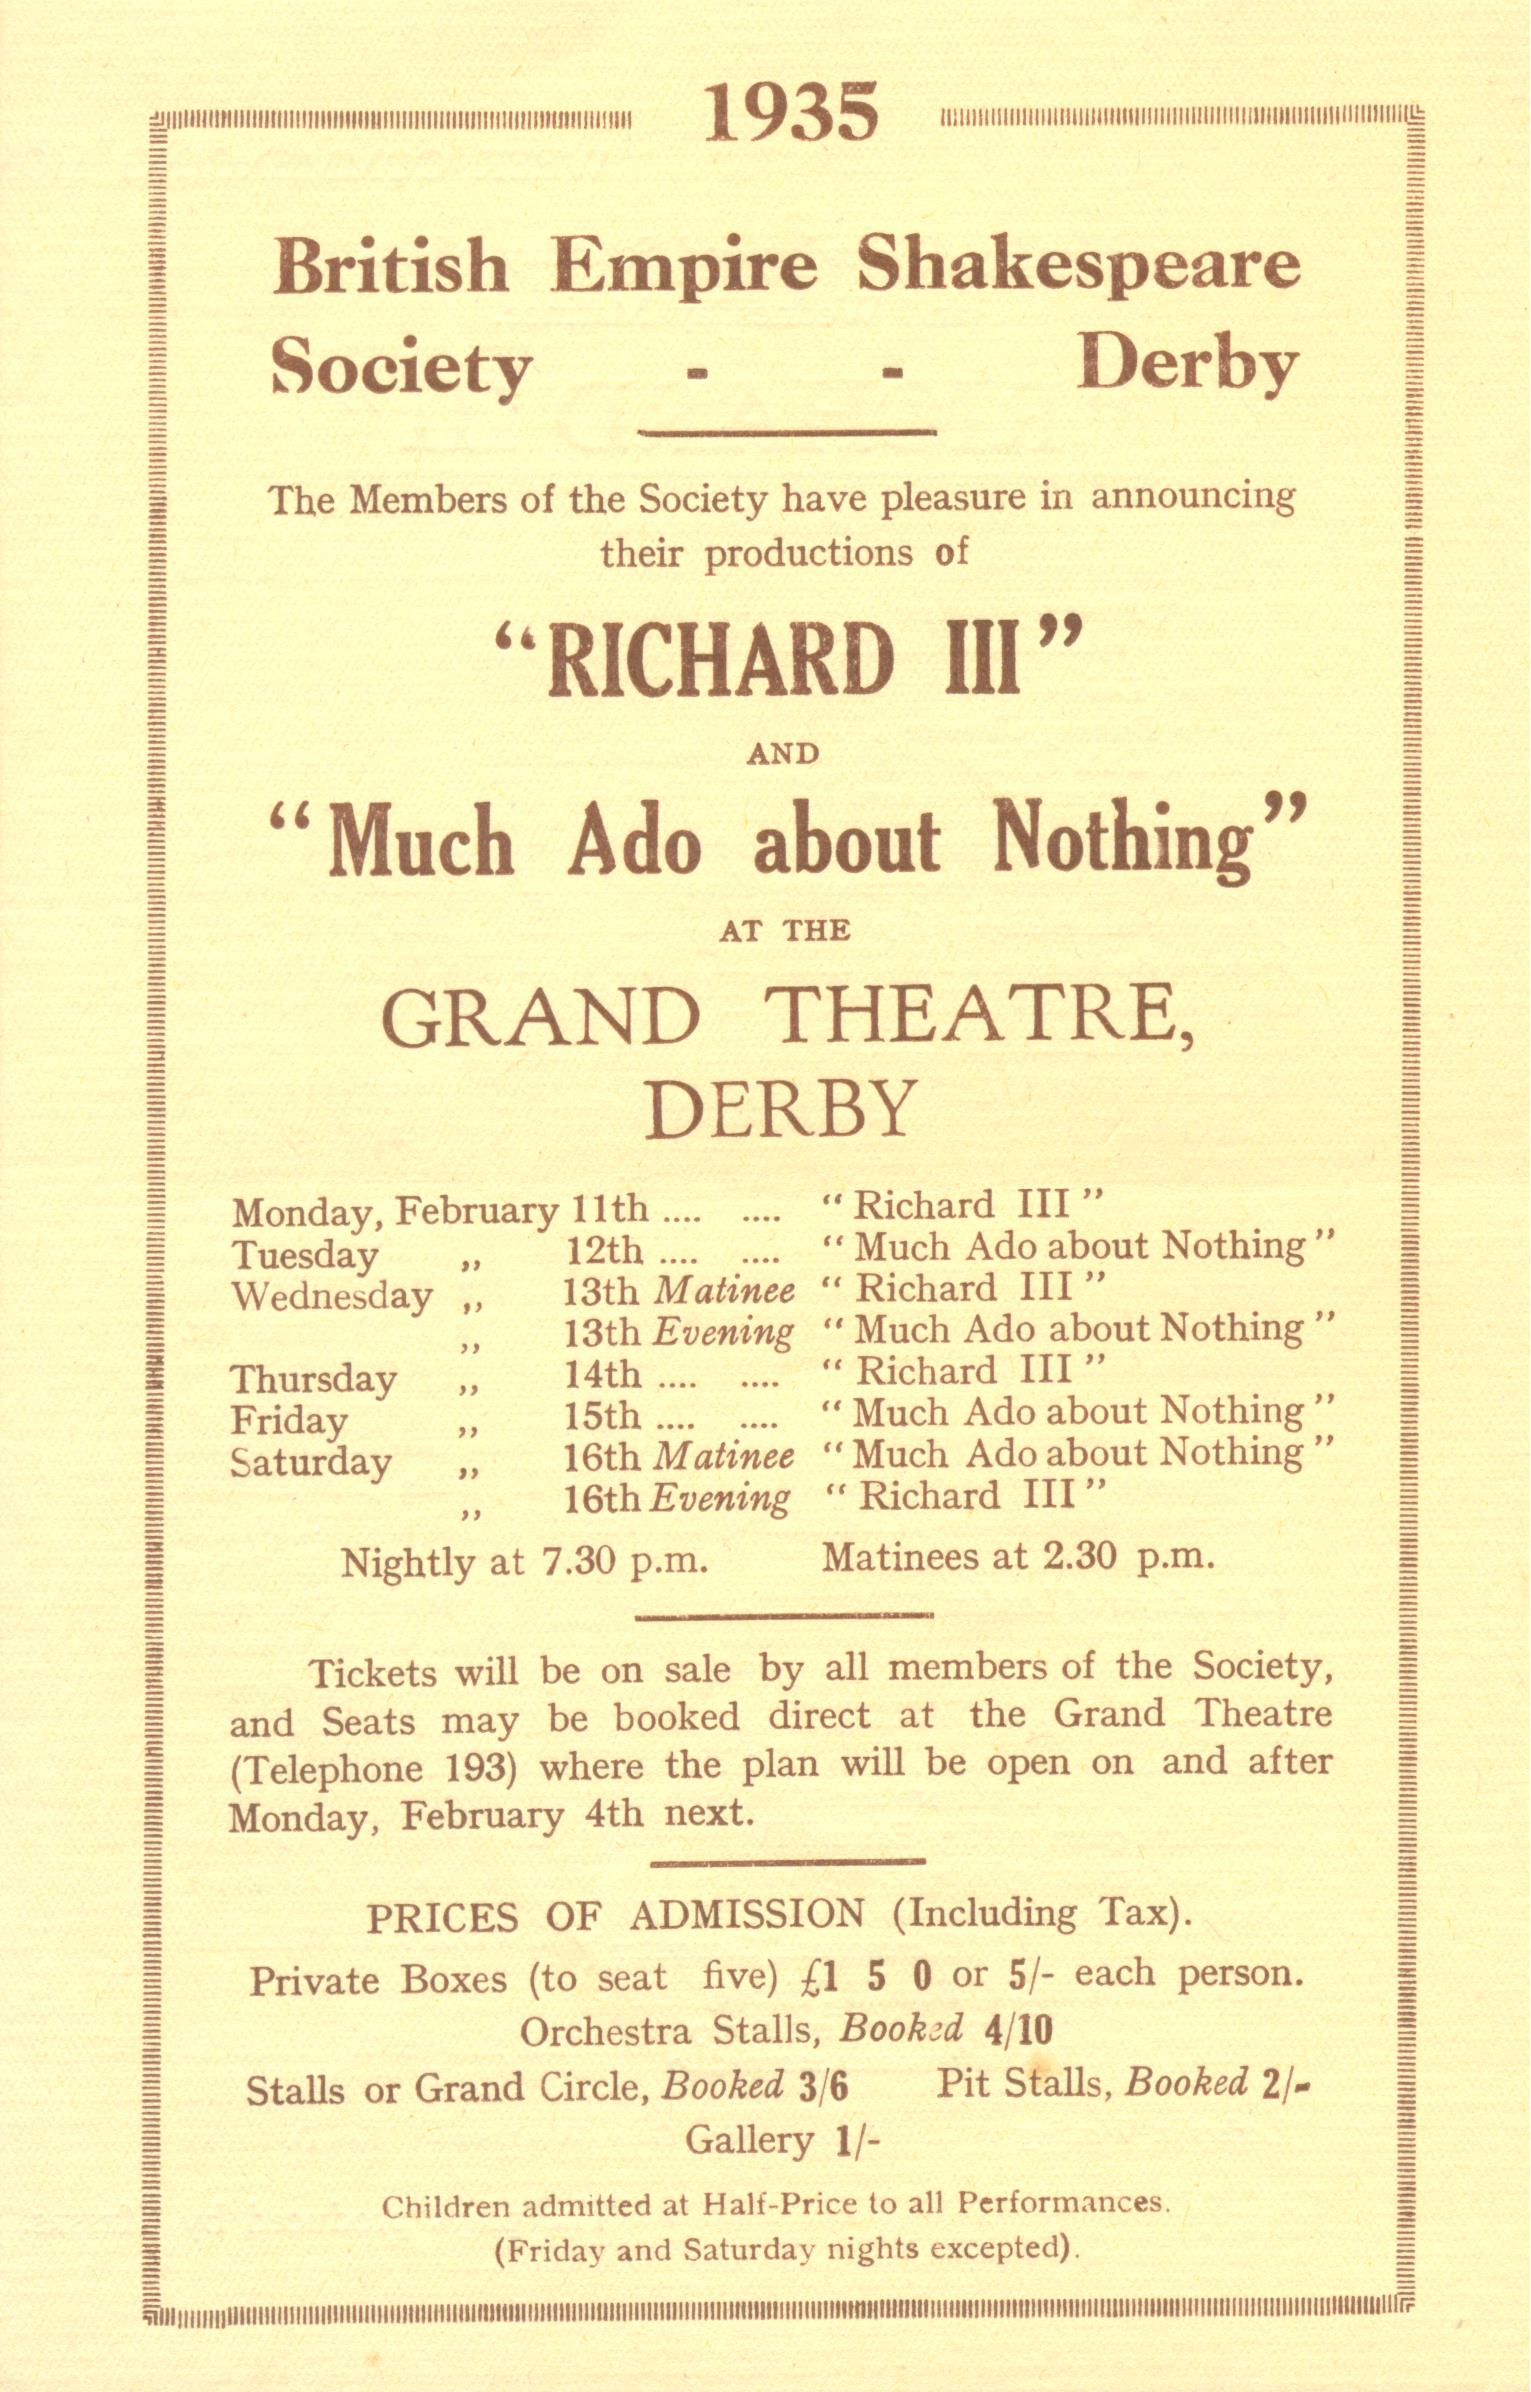 'Richard III' & 'Much Ado About Nothing' 1935